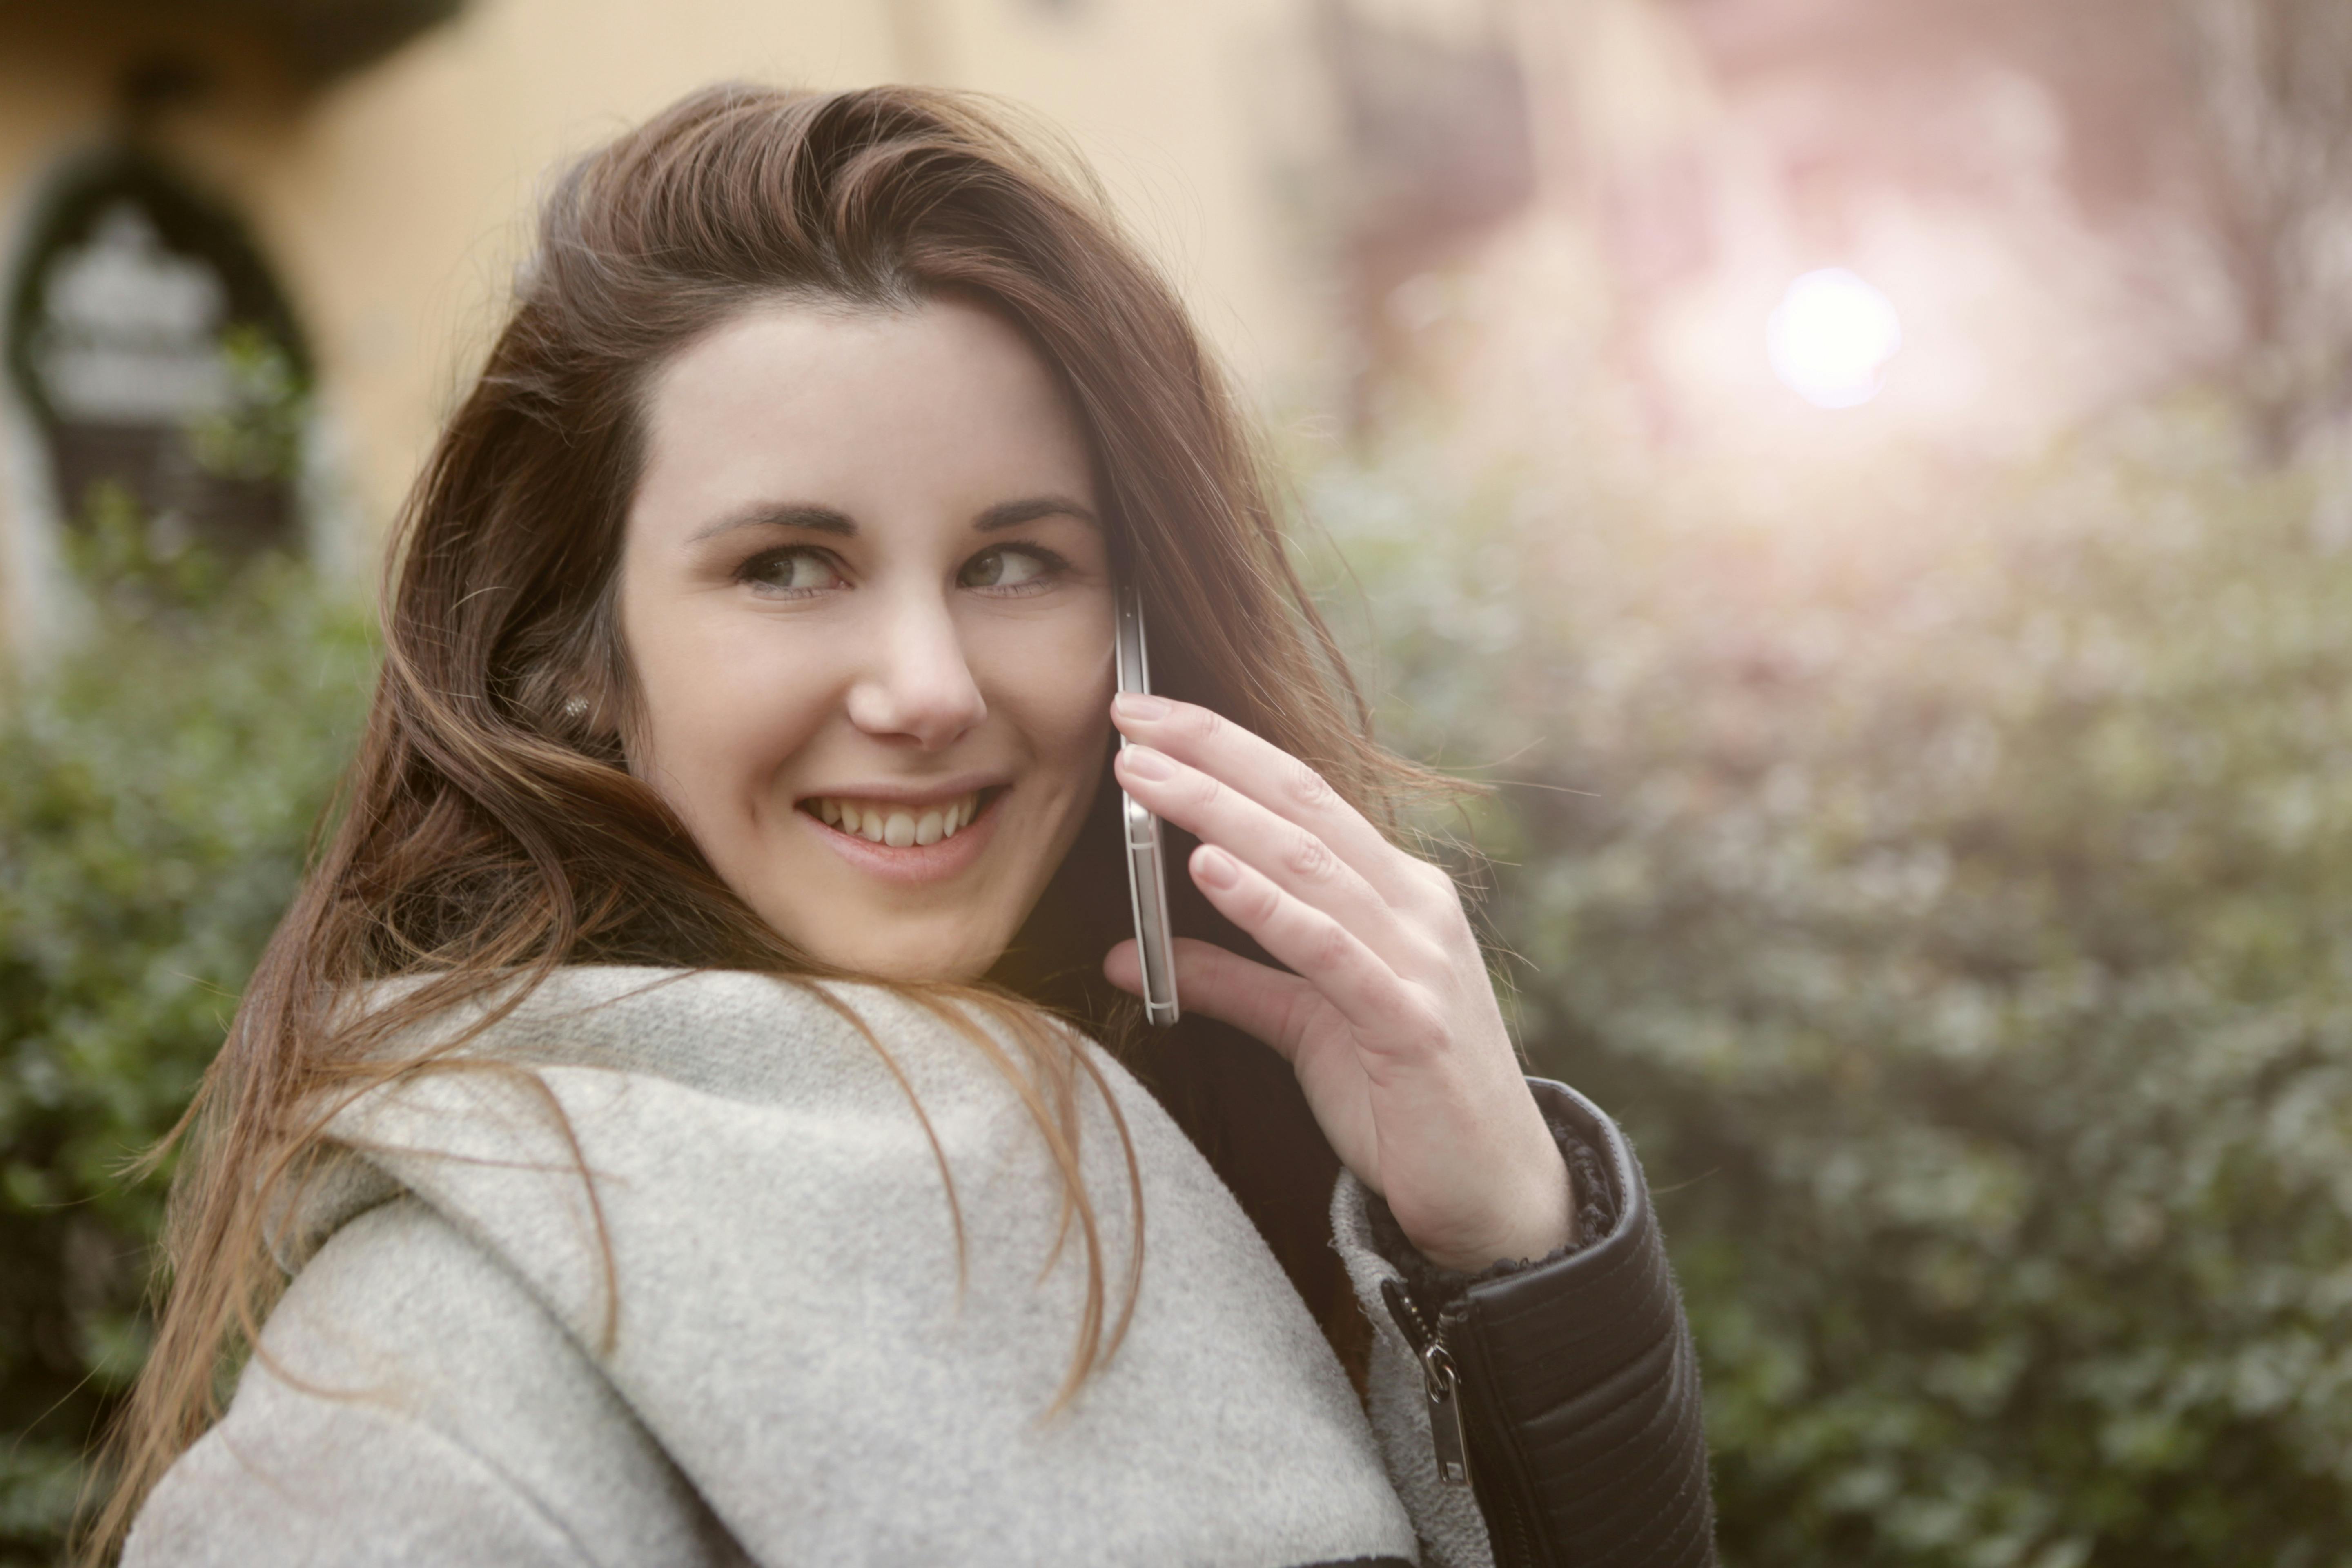 A happy woman talking on the phone | Source: Pexels